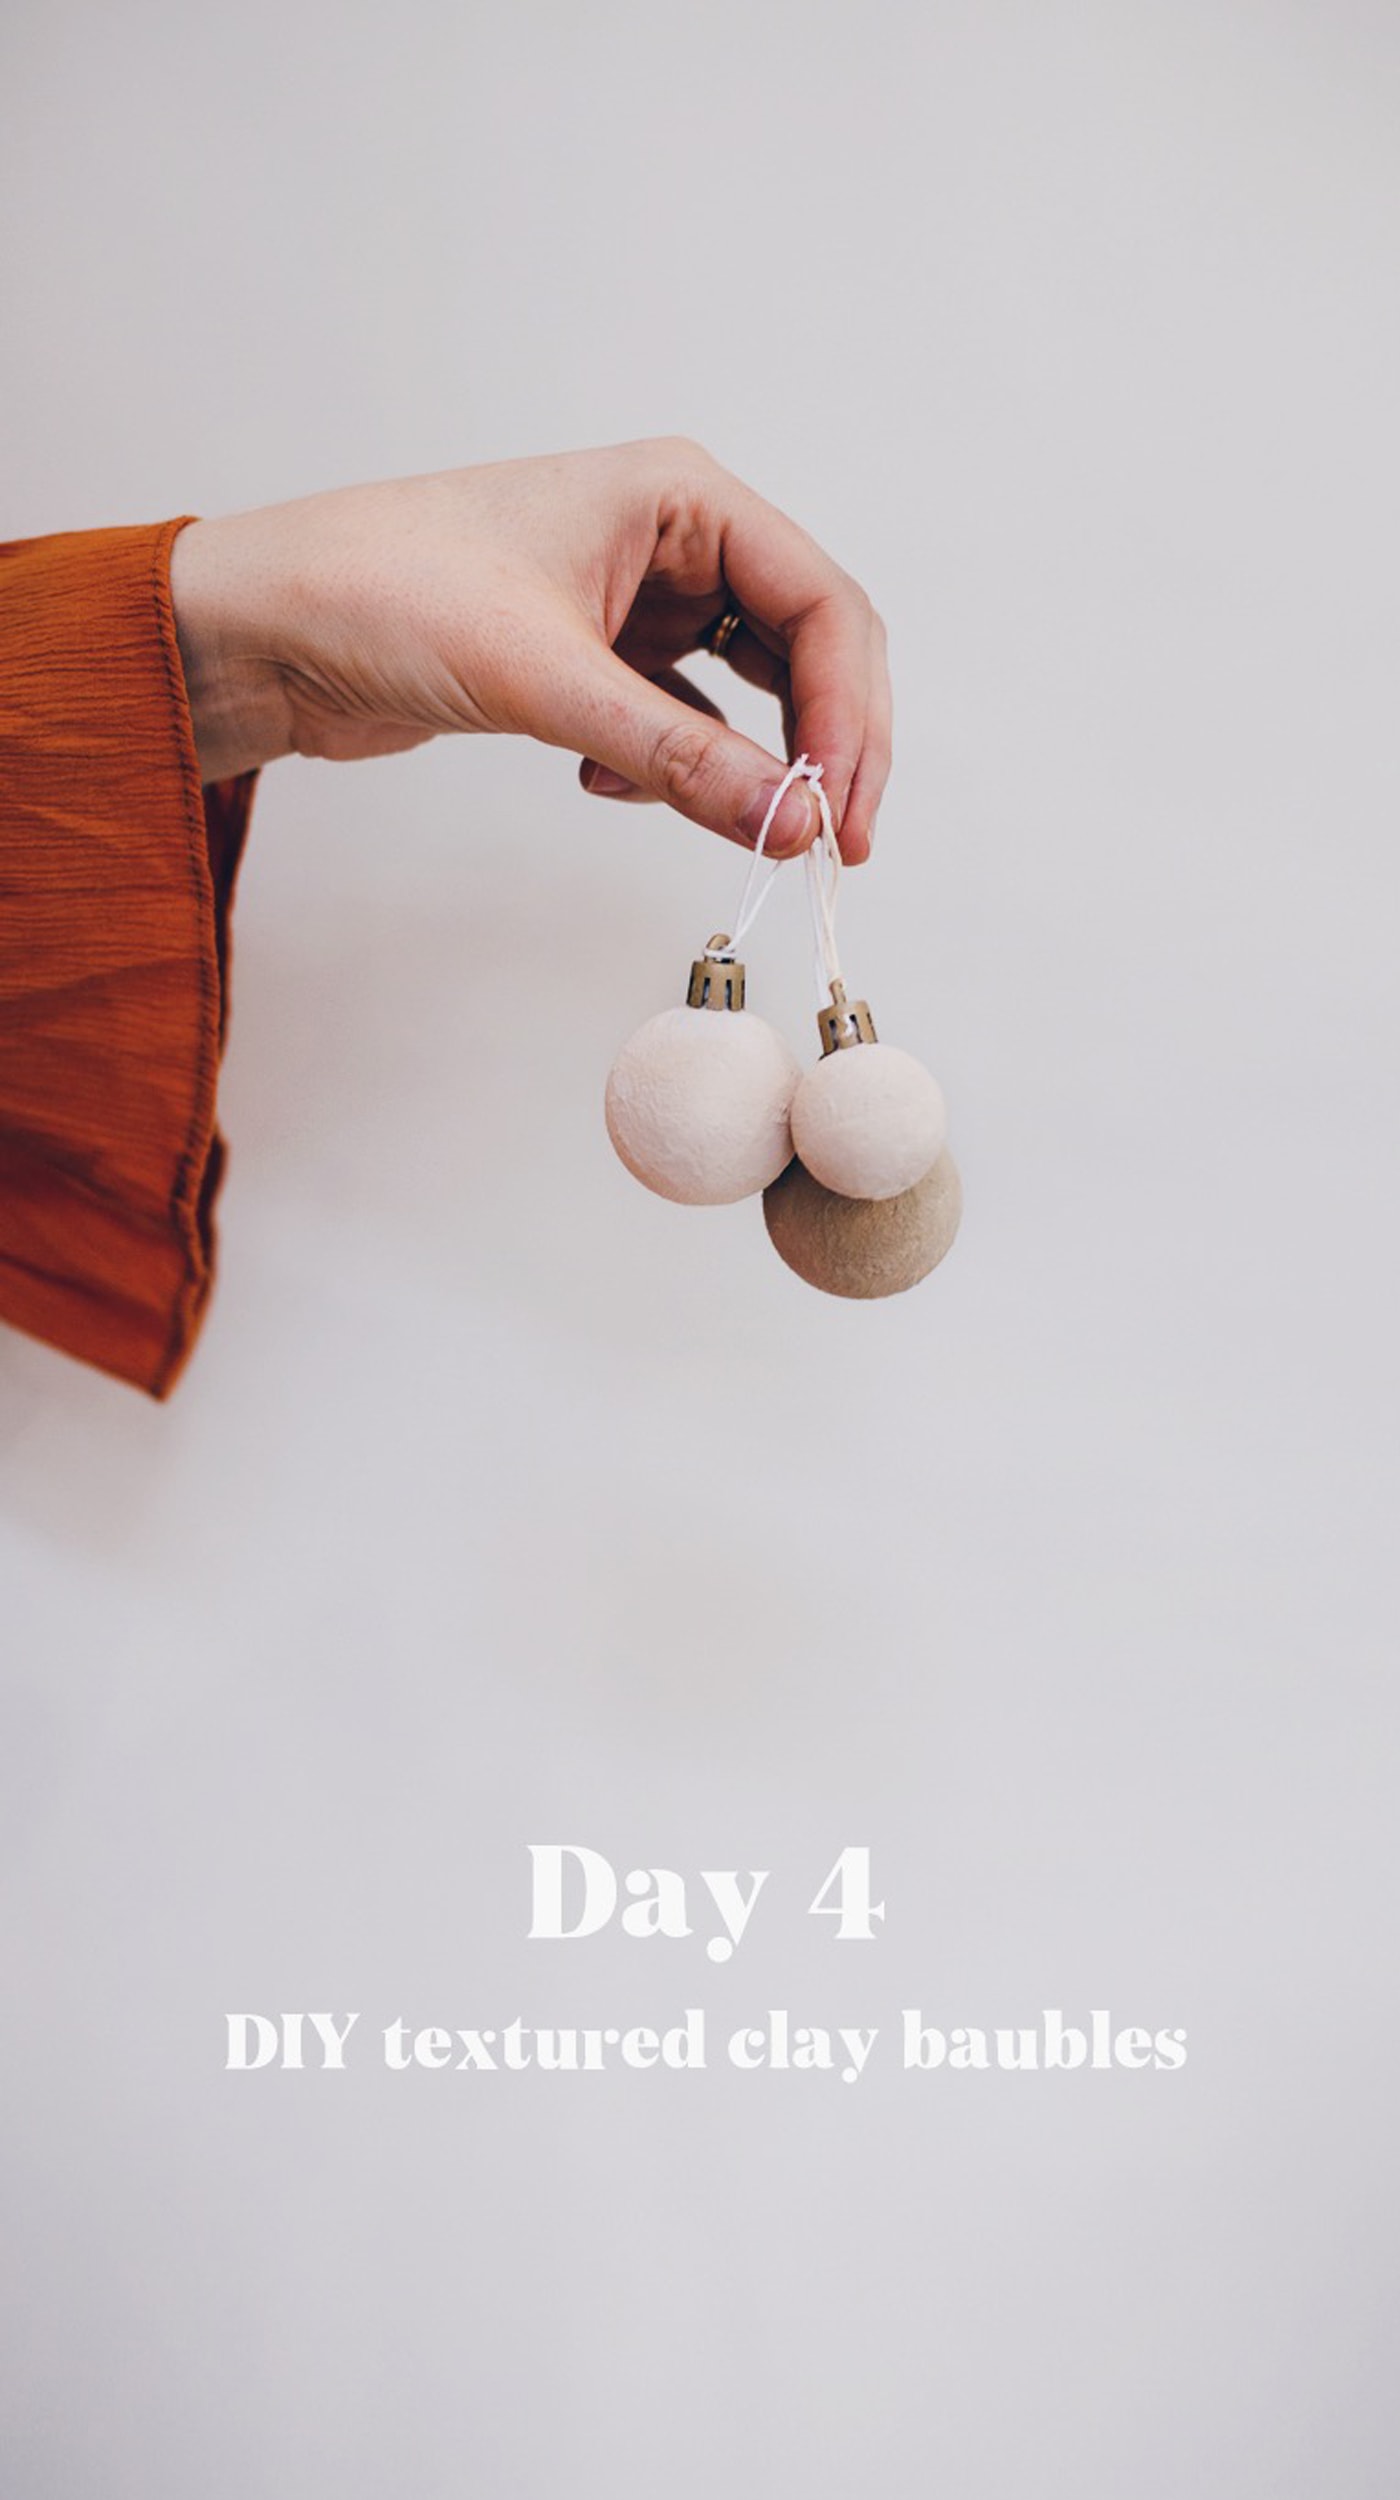 A Week Of DIY Christmas Decorations